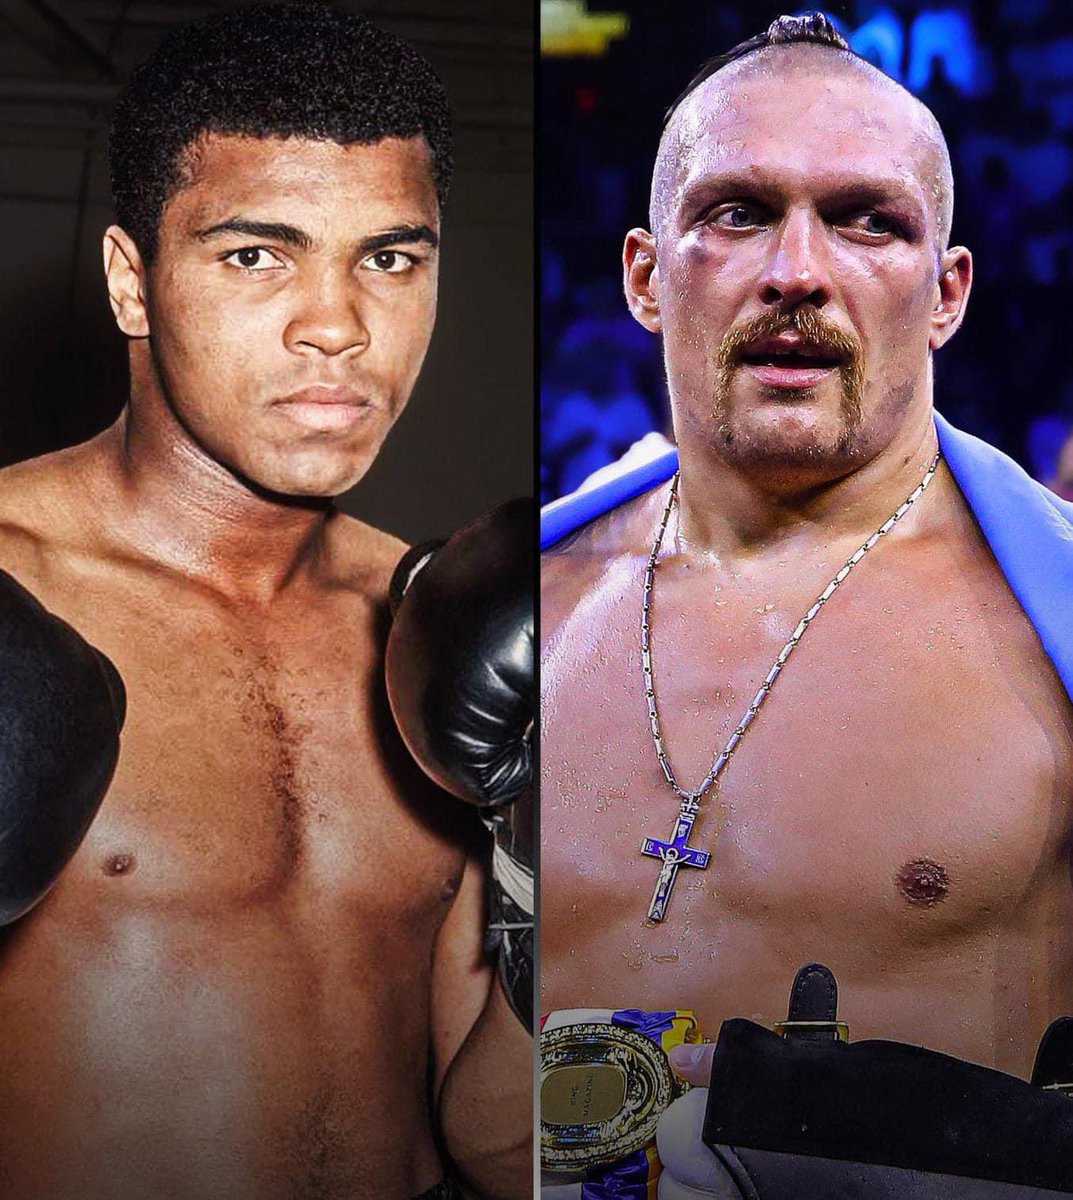 Fun Fact! Muhammad Ali and Oleksandr Usyk have the same Reach (78 in), the same height (6'3'), and the same Birthday (Jan 17th). Coincidence? 🥊 #Boxing #UFC #Sports